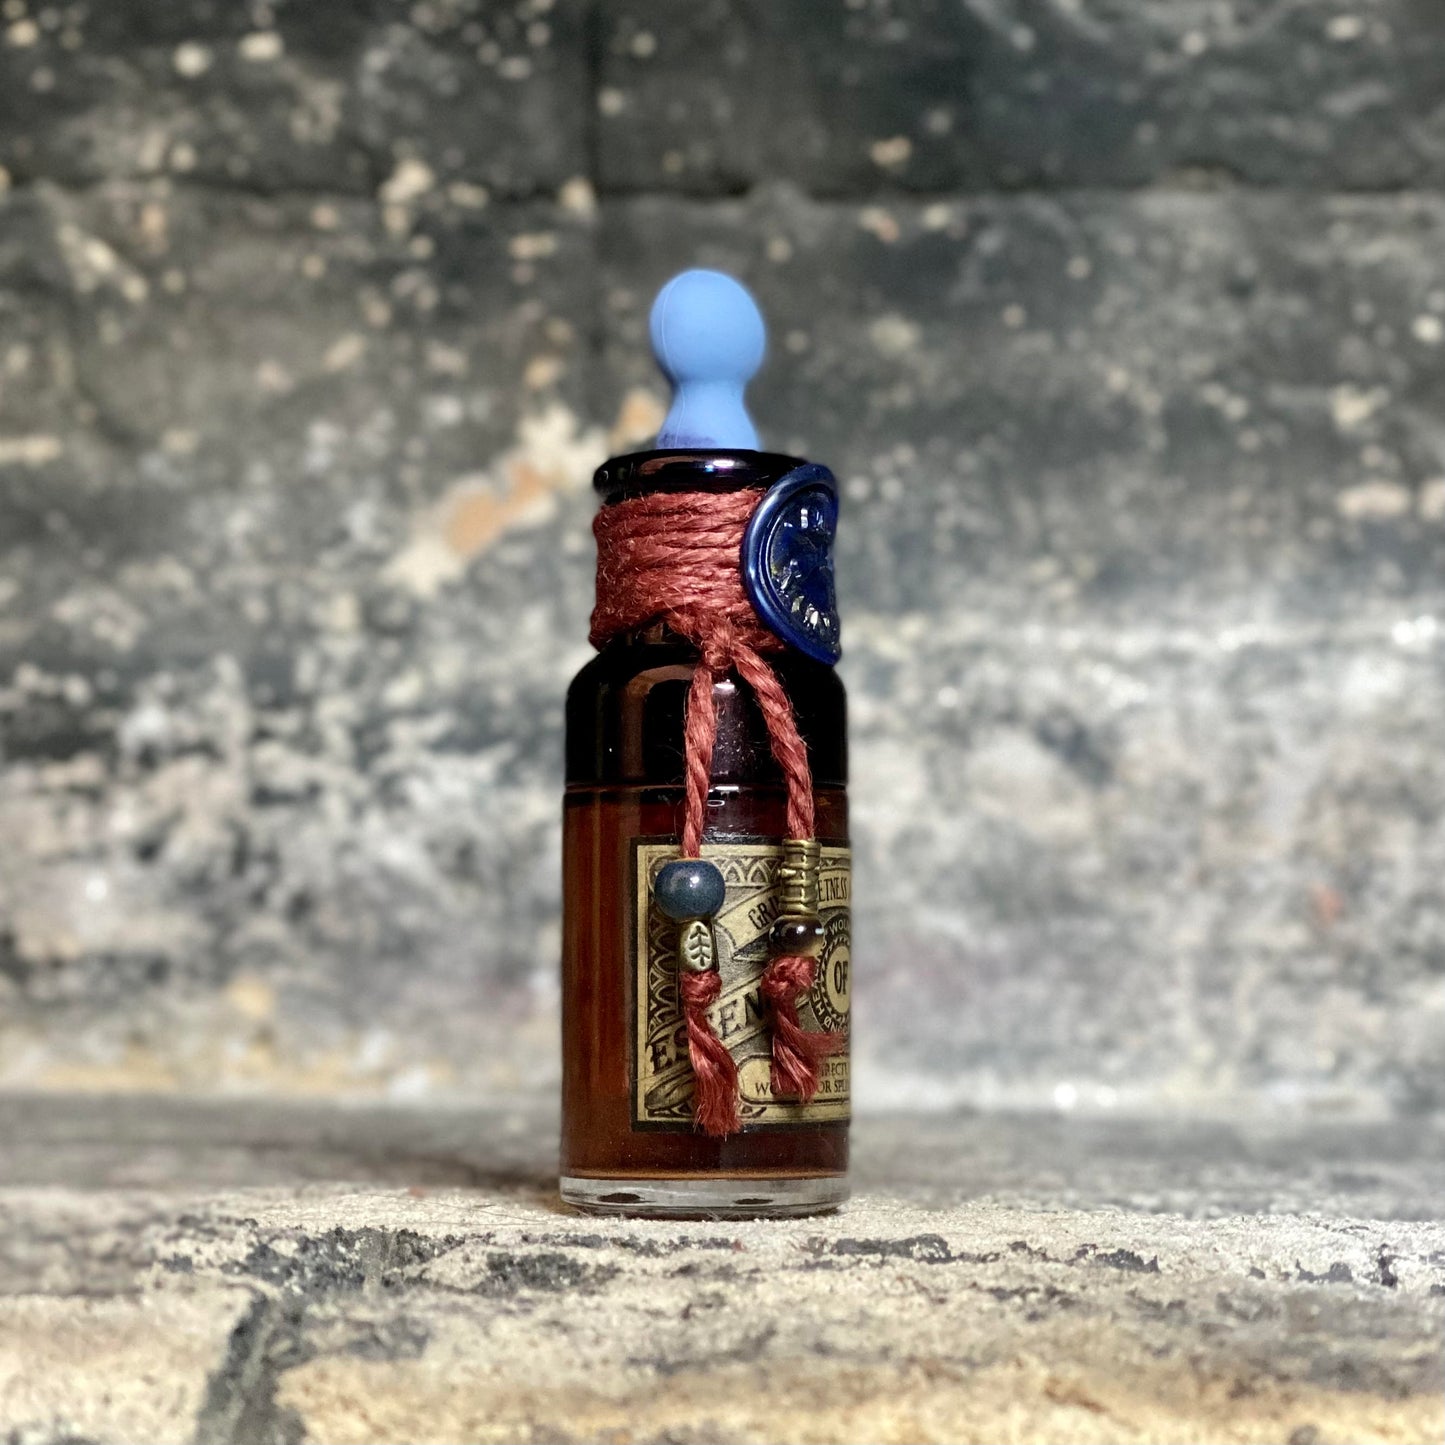 Essence of Dittany, A Magical Color Changing Potion Bottle Prop